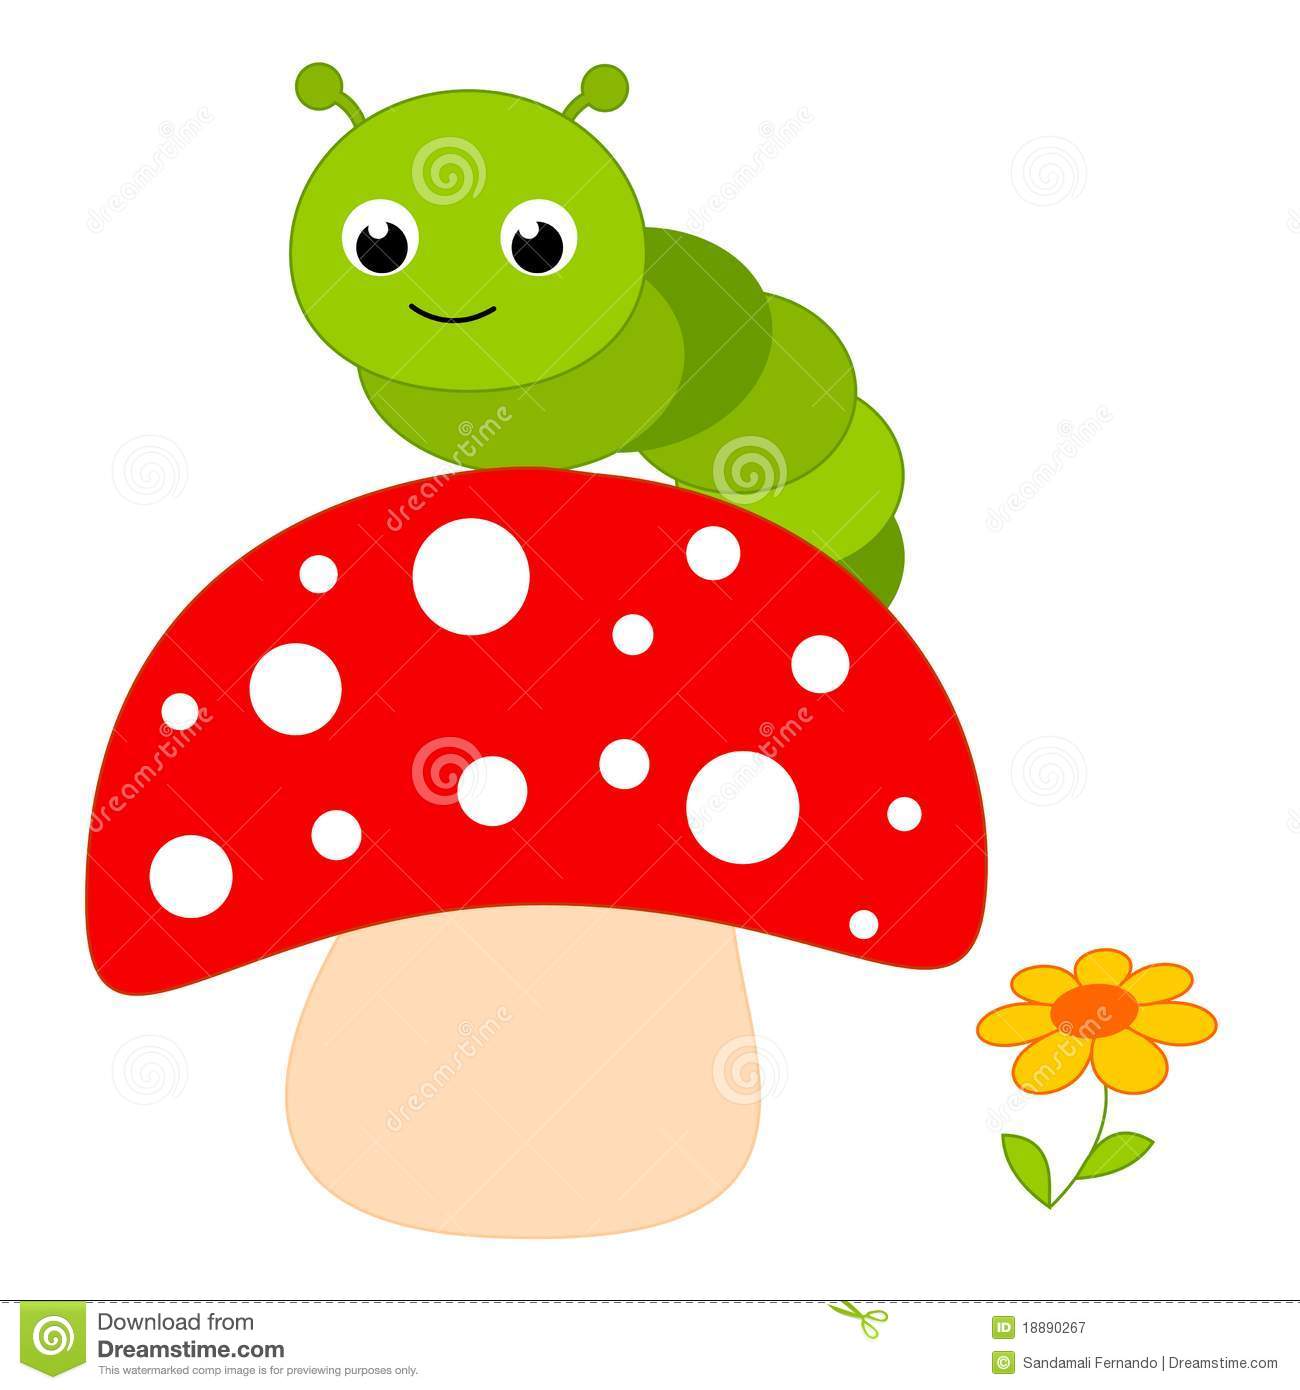 Illustration Of A Cute Little Worm On Colorful Mushroom Isolated On